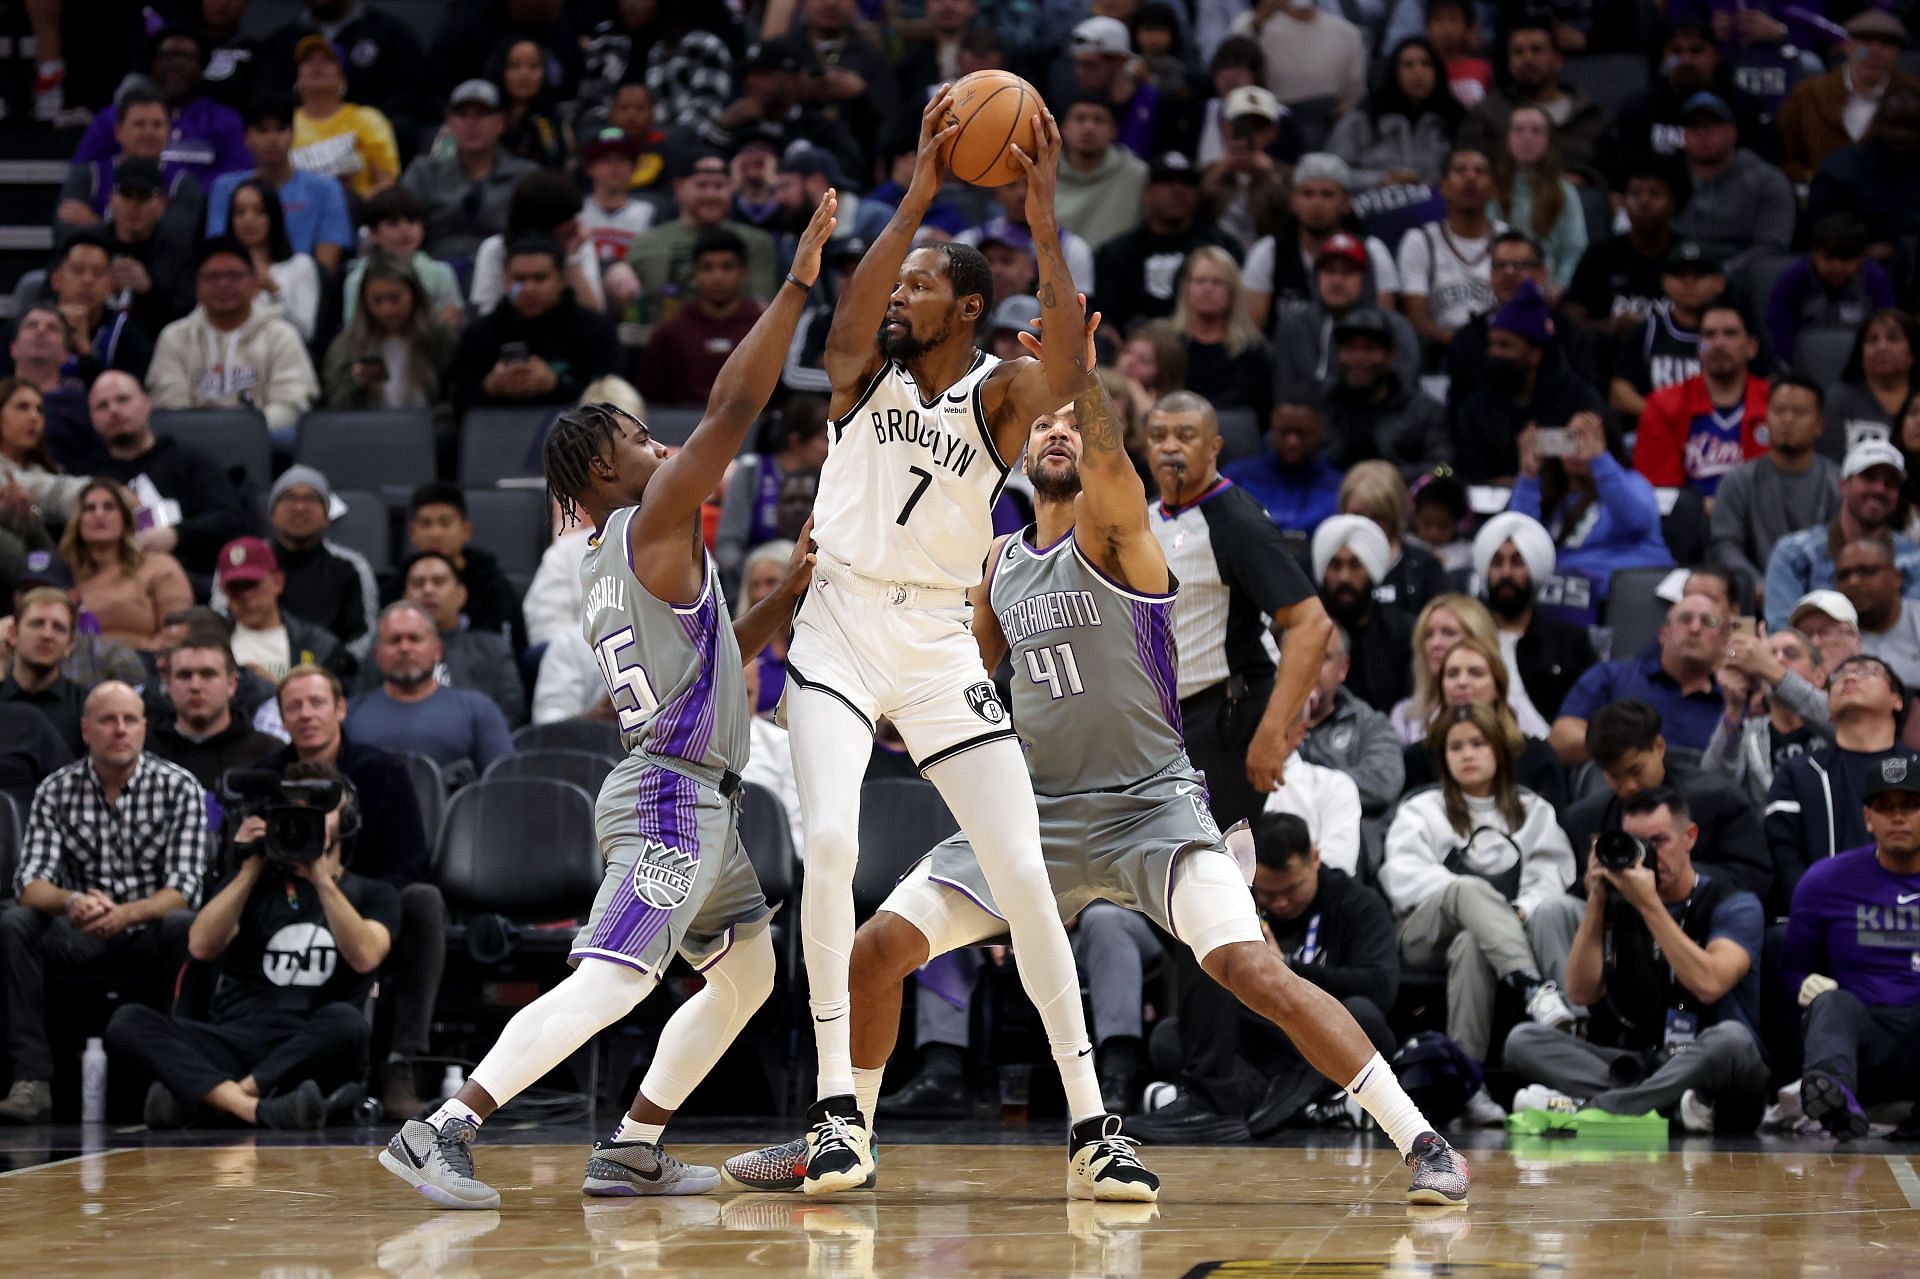 Kevin Durant being guarded by two Kings players